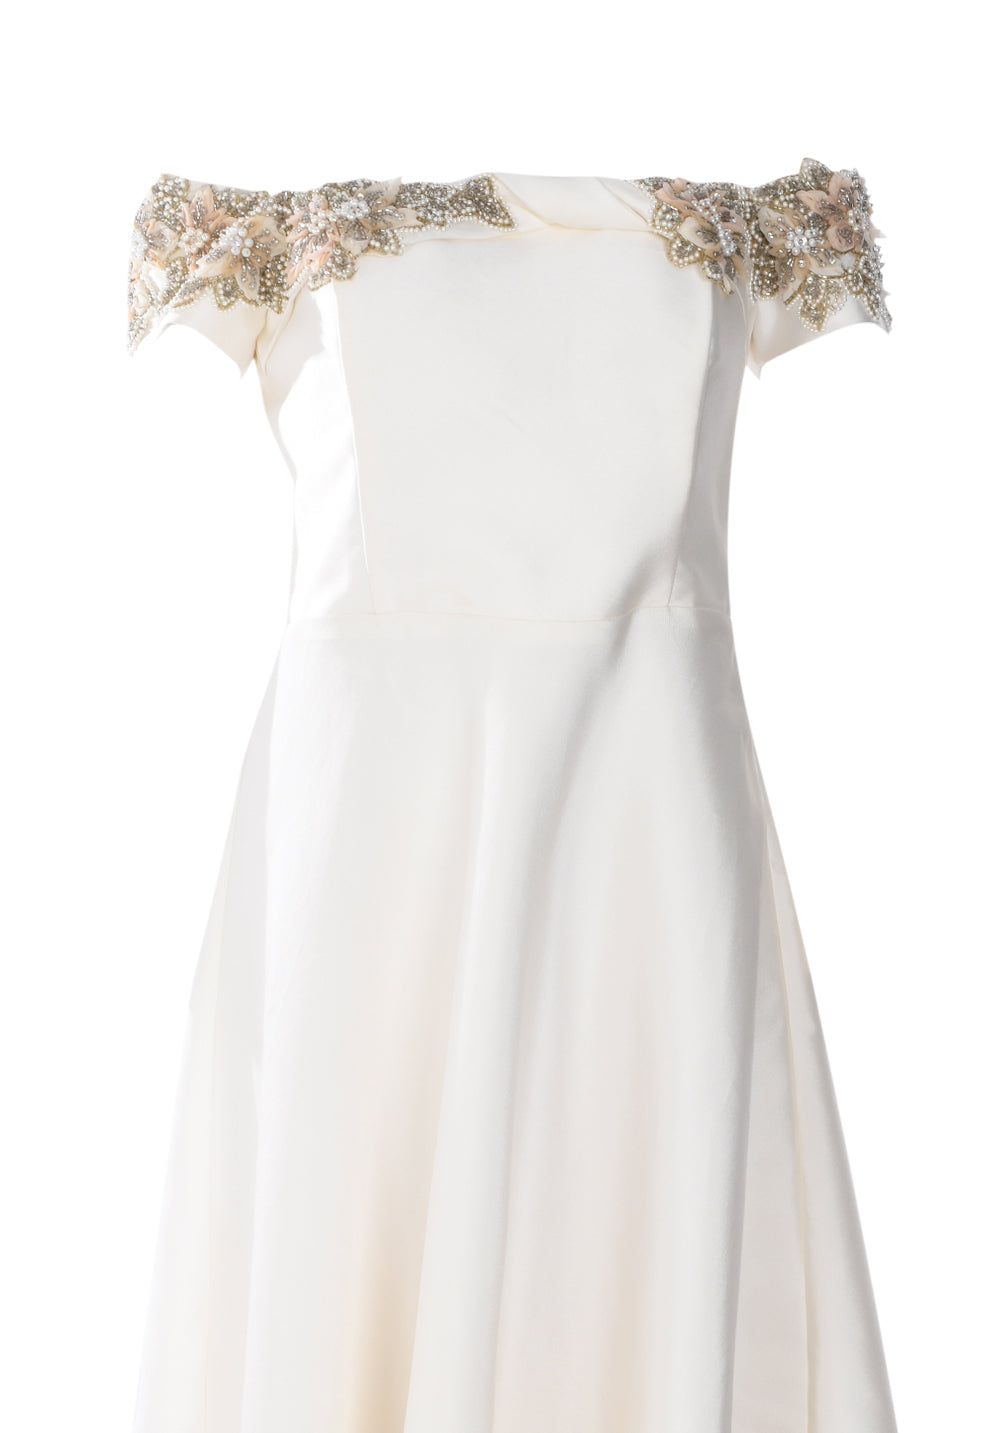 SHORT SLEEVED SQUARE NECK DRESS WITH EMBROIDERED EMBELLISHMENTS ON THE NECK LINE AND BACK